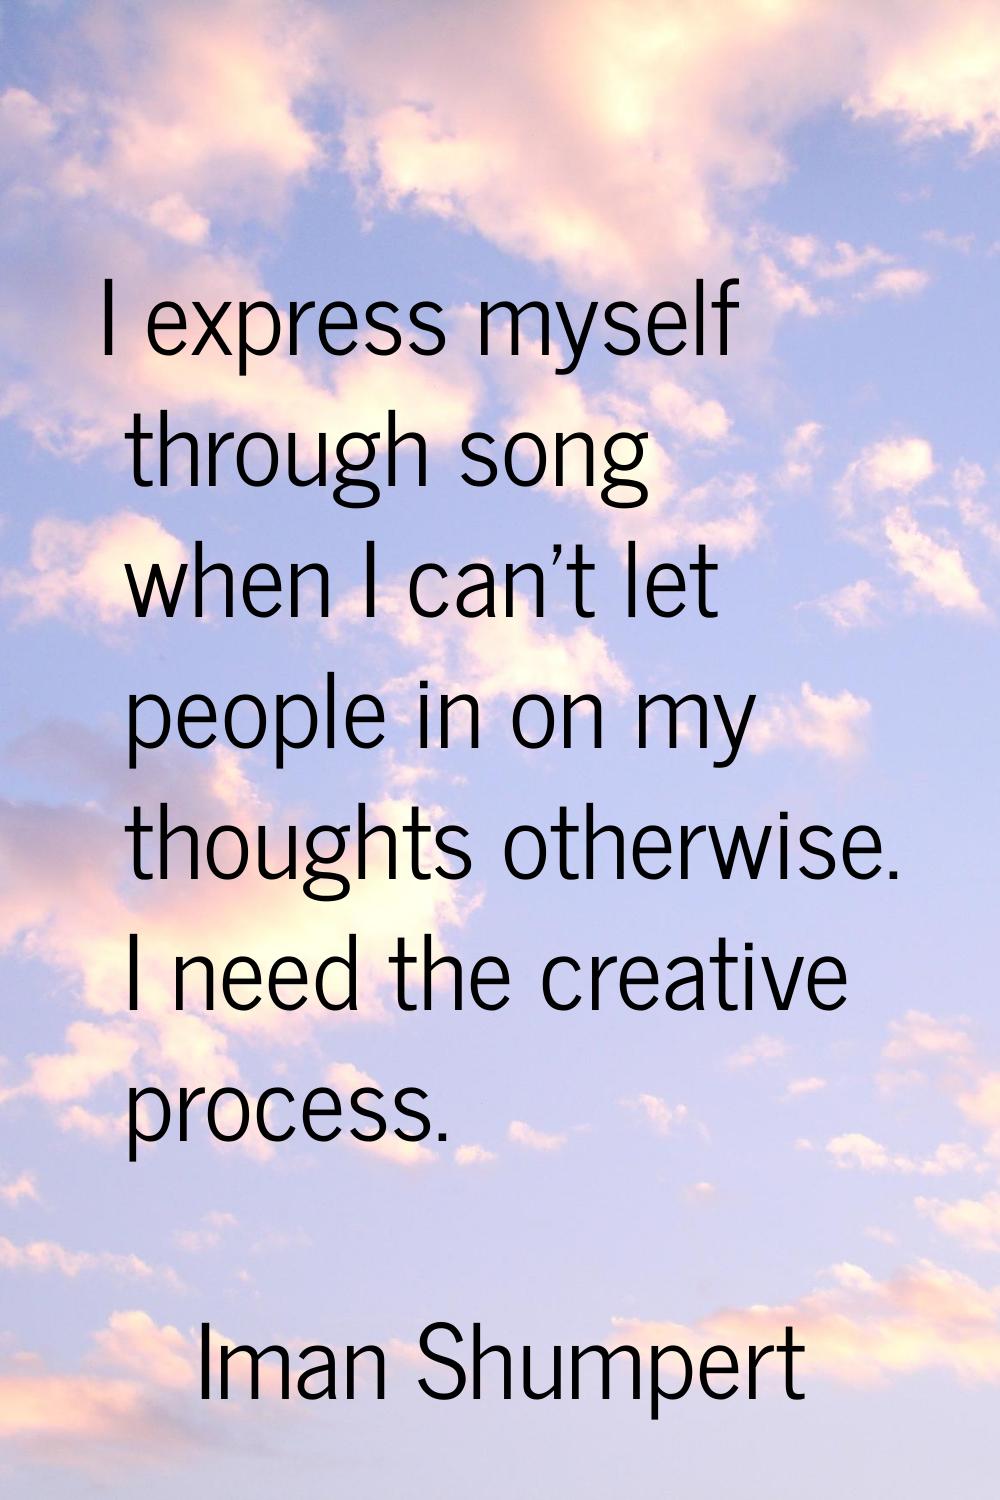 I express myself through song when I can't let people in on my thoughts otherwise. I need the creat